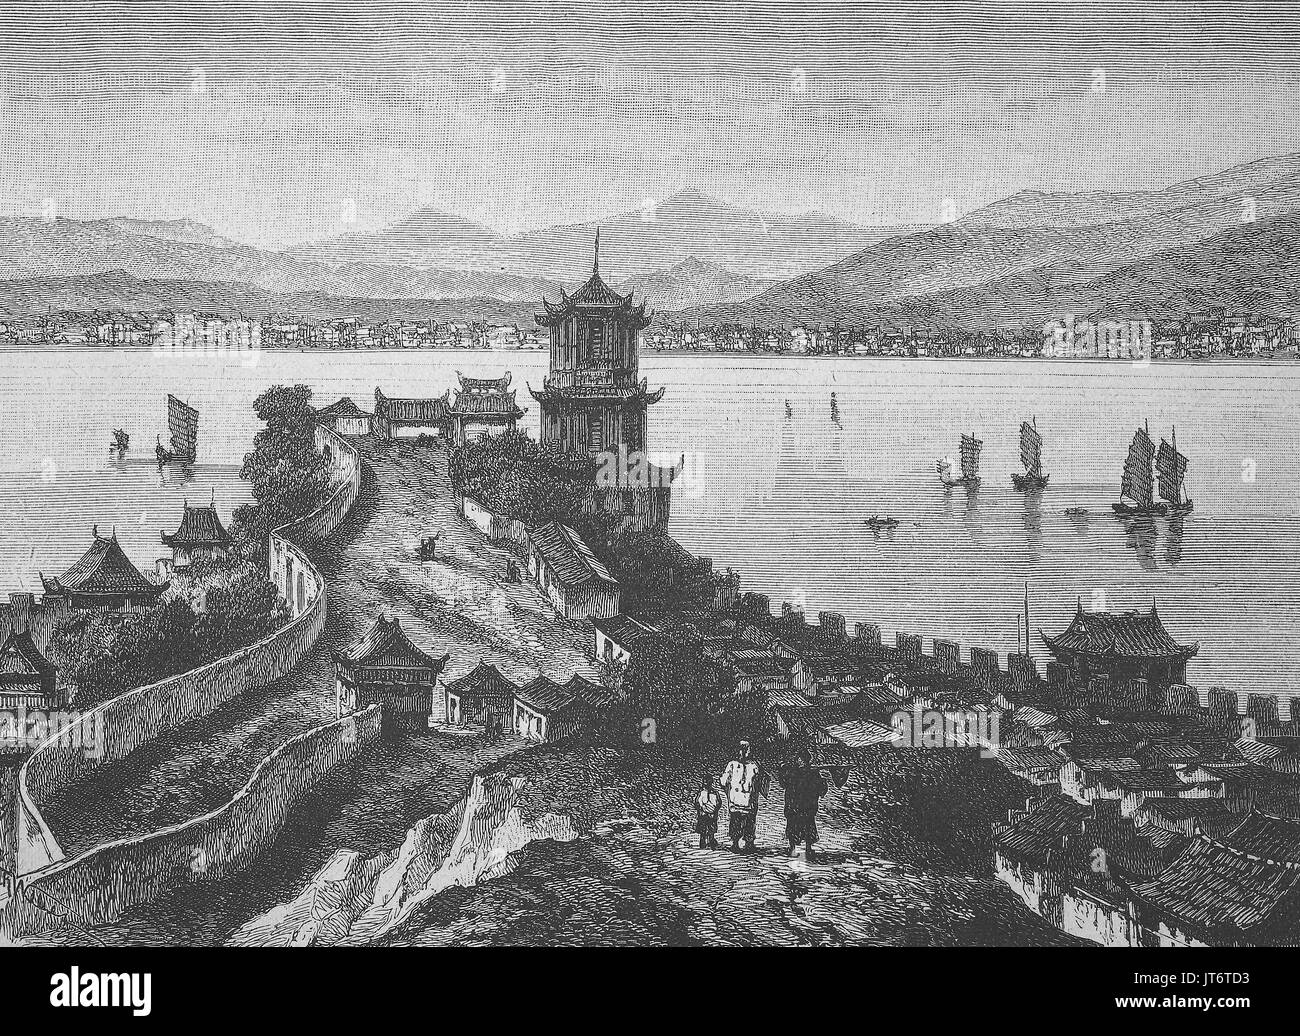 river Yangtze near Wu-Tschang-Fu, with Pagoda and temple, China, Digital improved reproduction of an image published between 1880 - 1885 Stock Photo